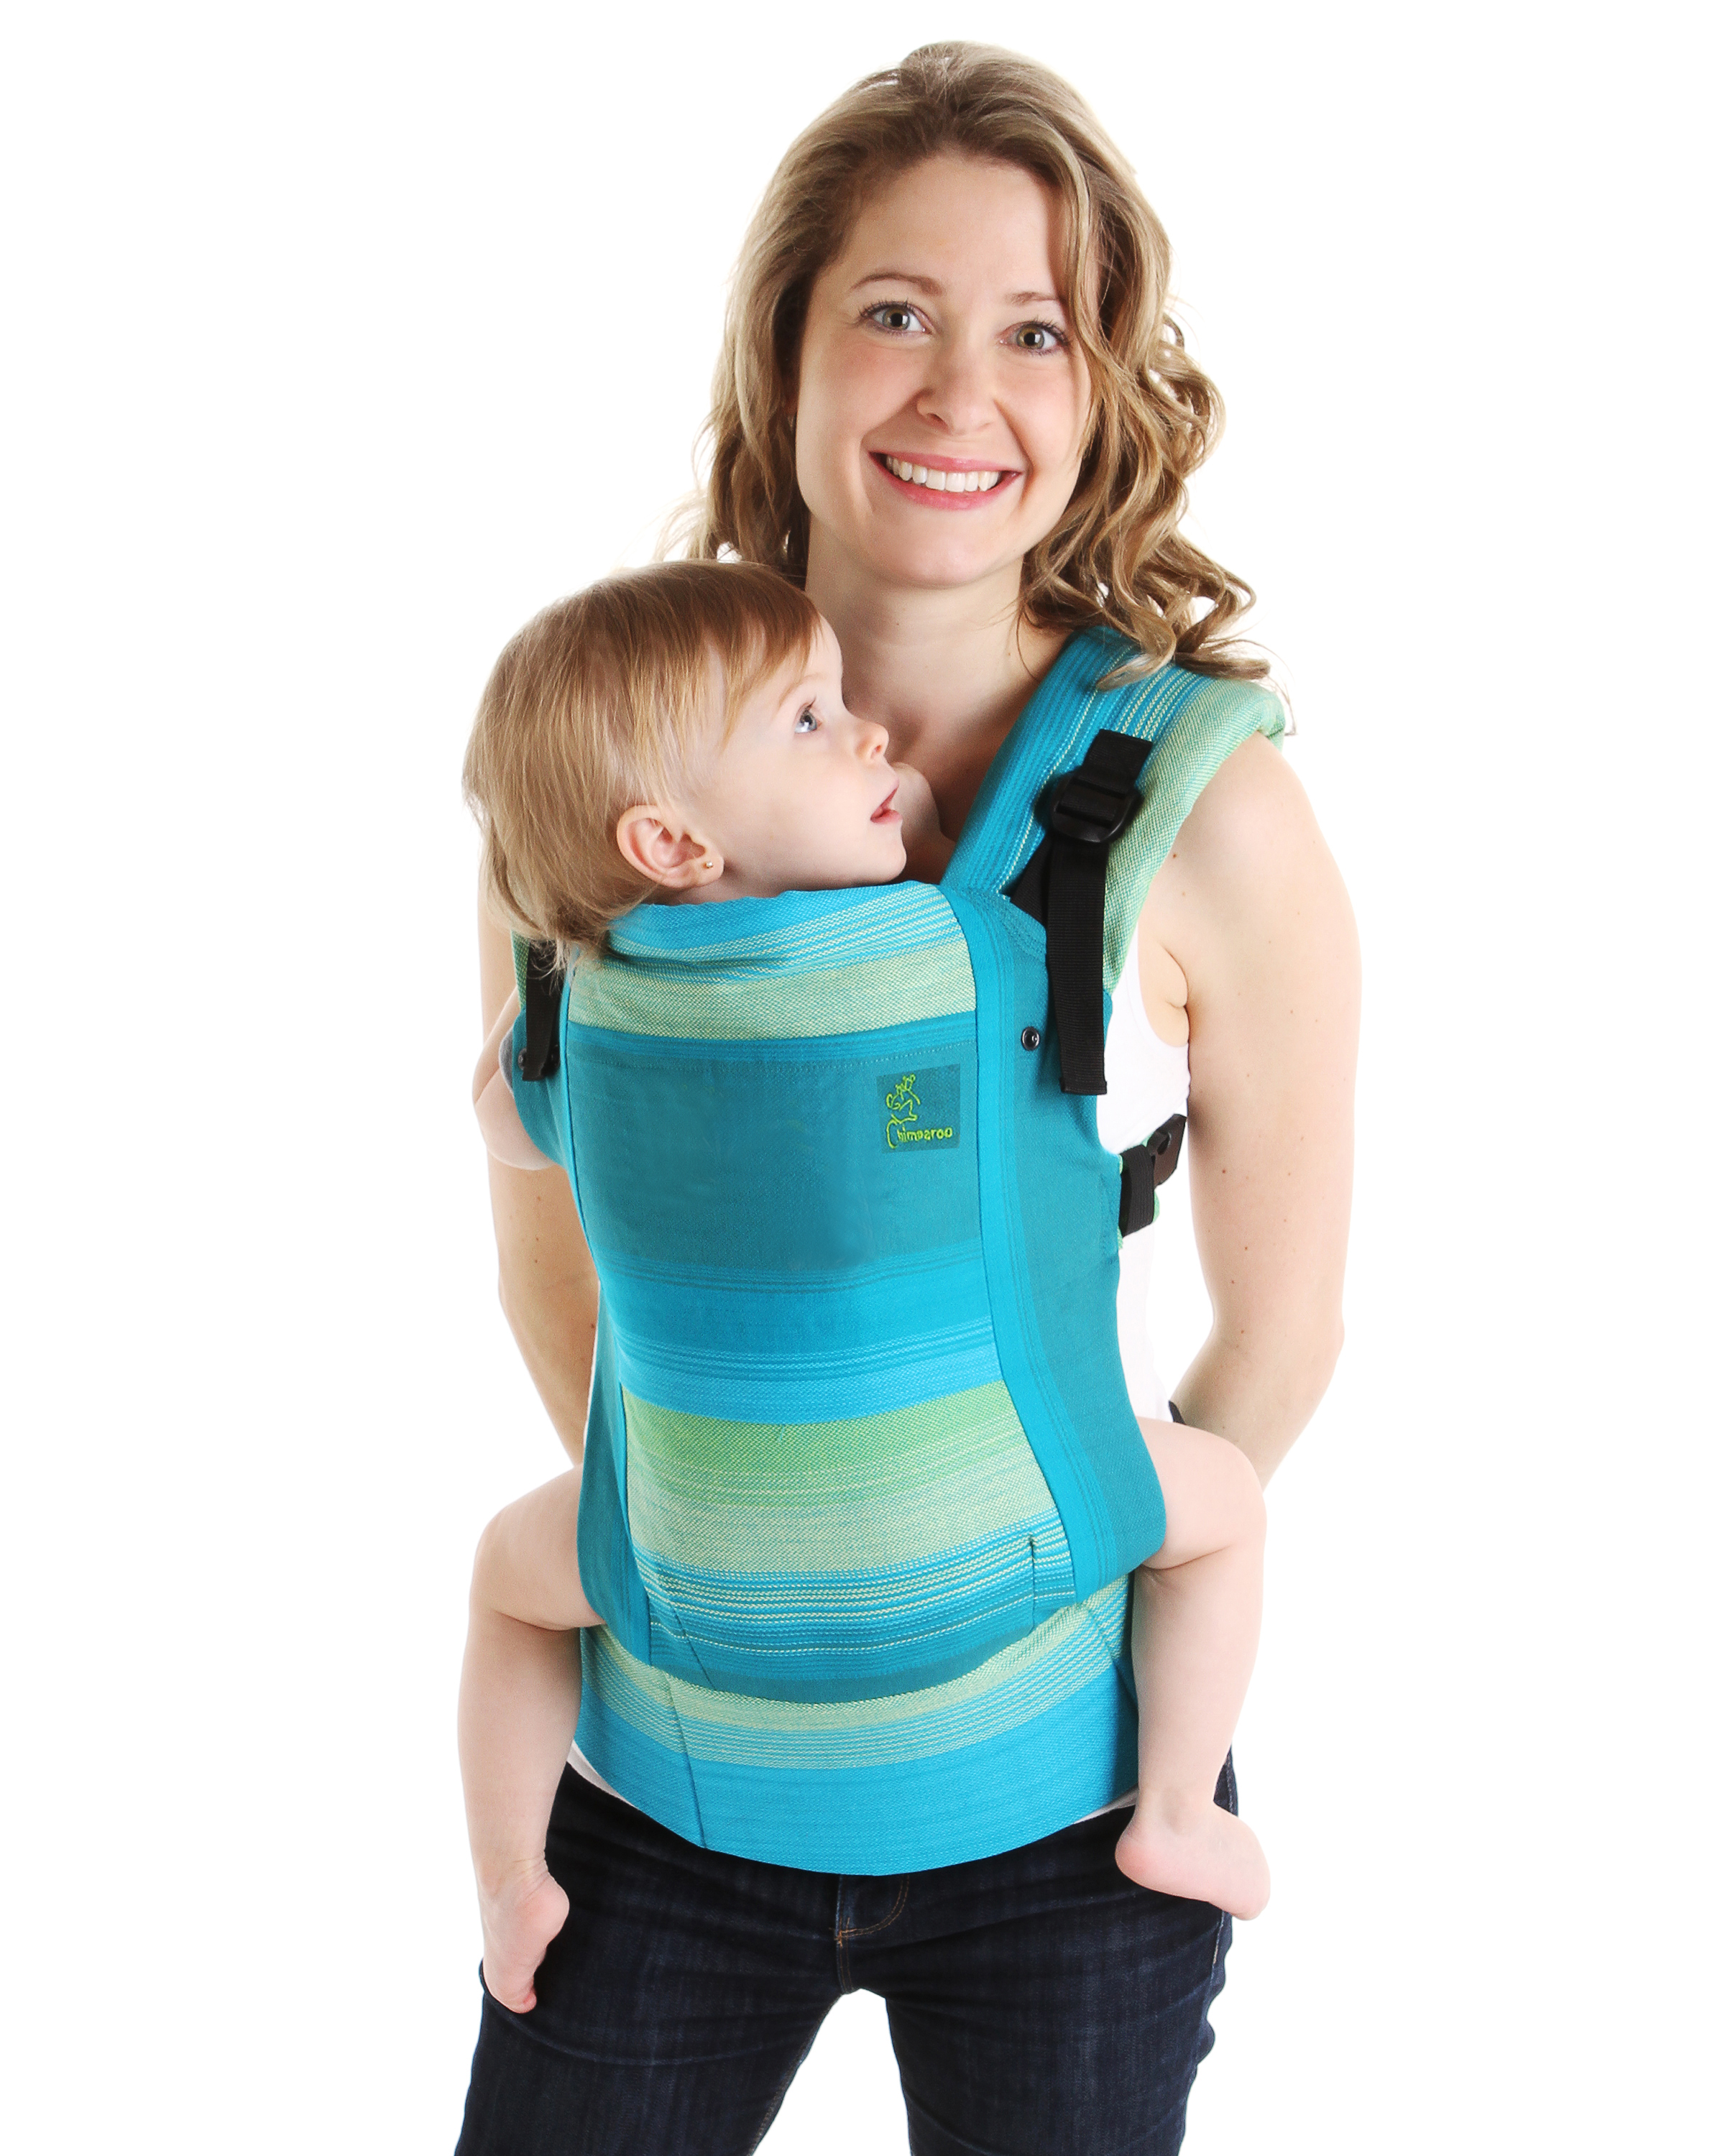 Chimparoo baby carrier